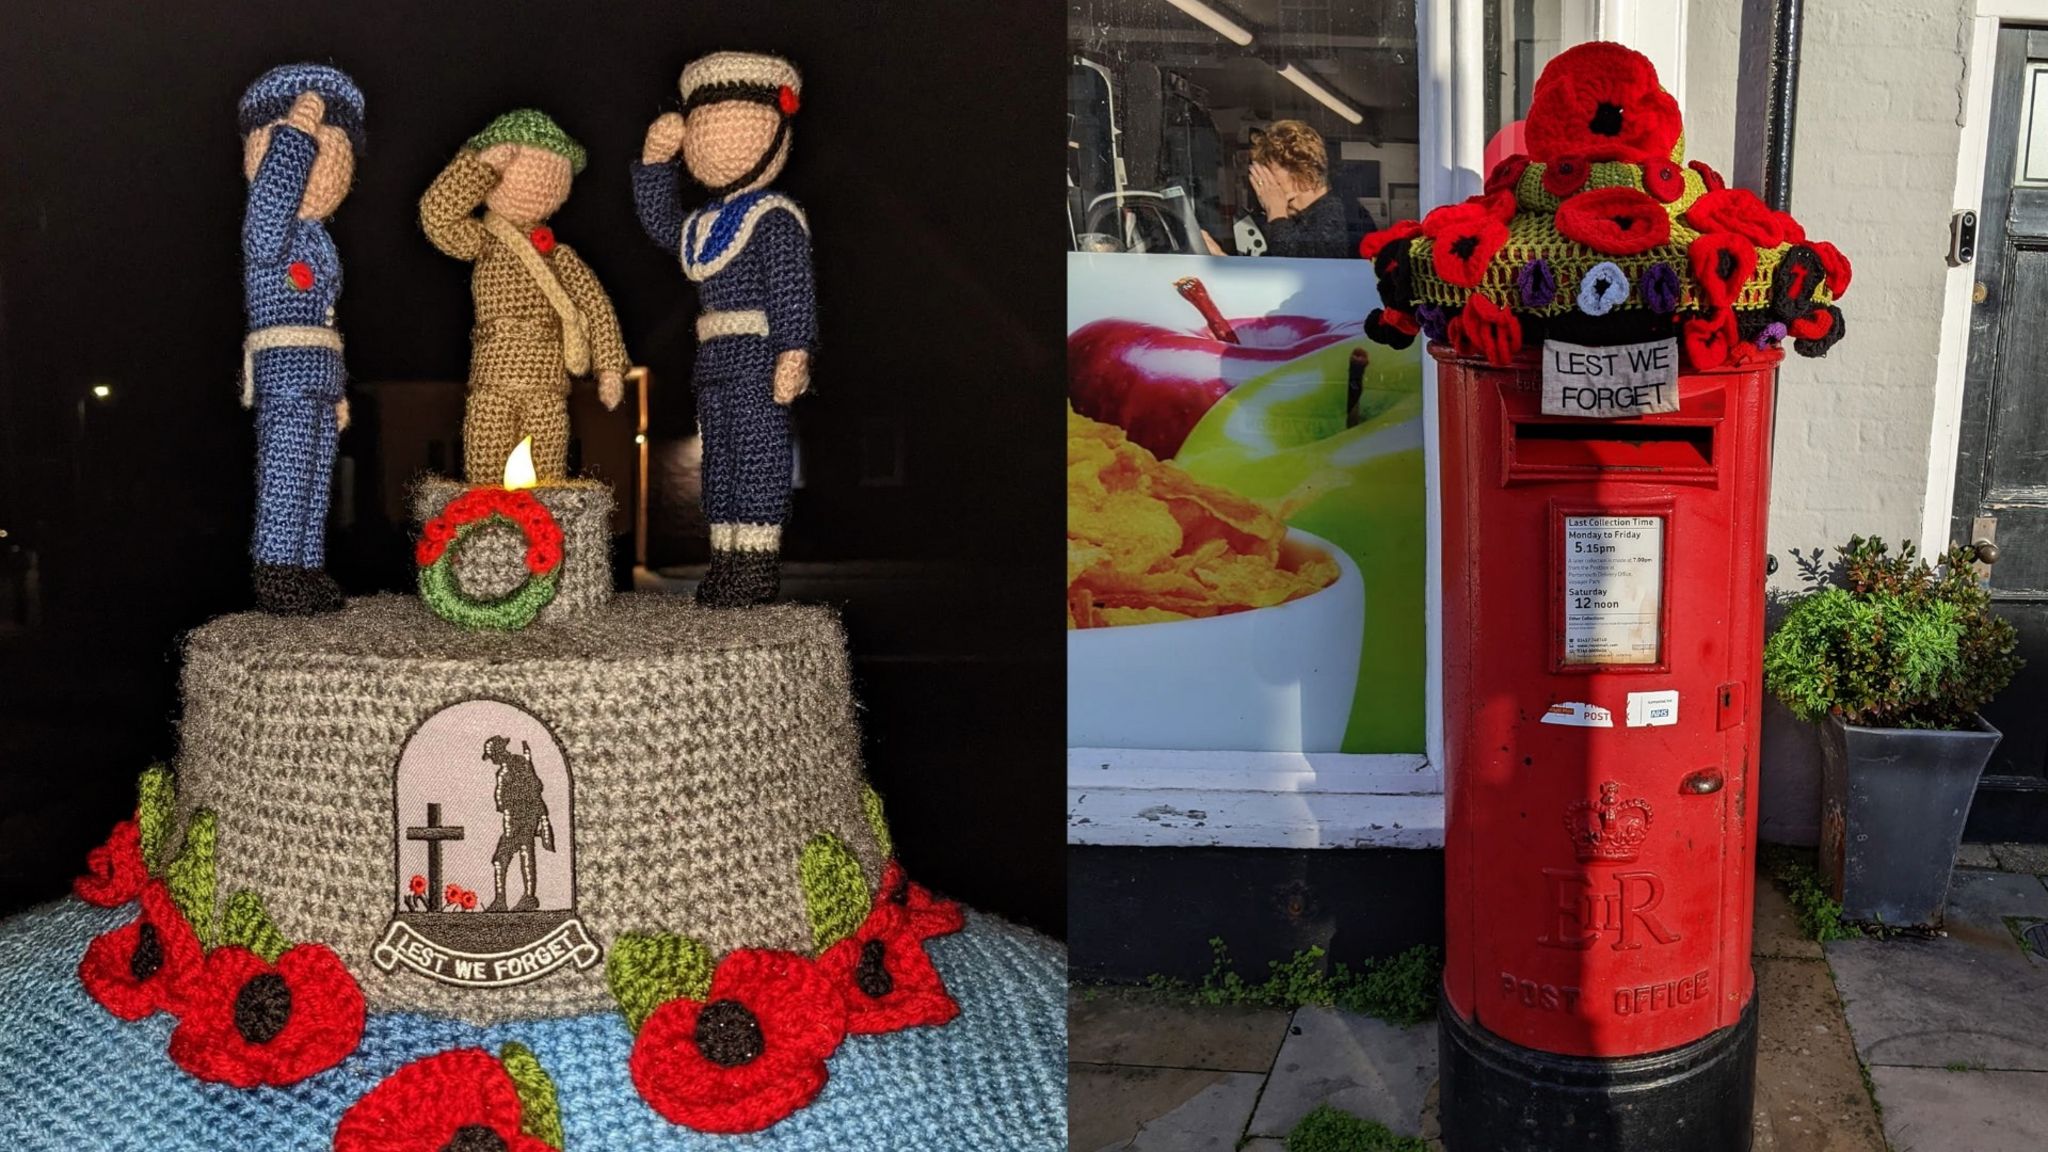 Characters pay their respects at a war memorial, and giant poppies decorate a postbox.